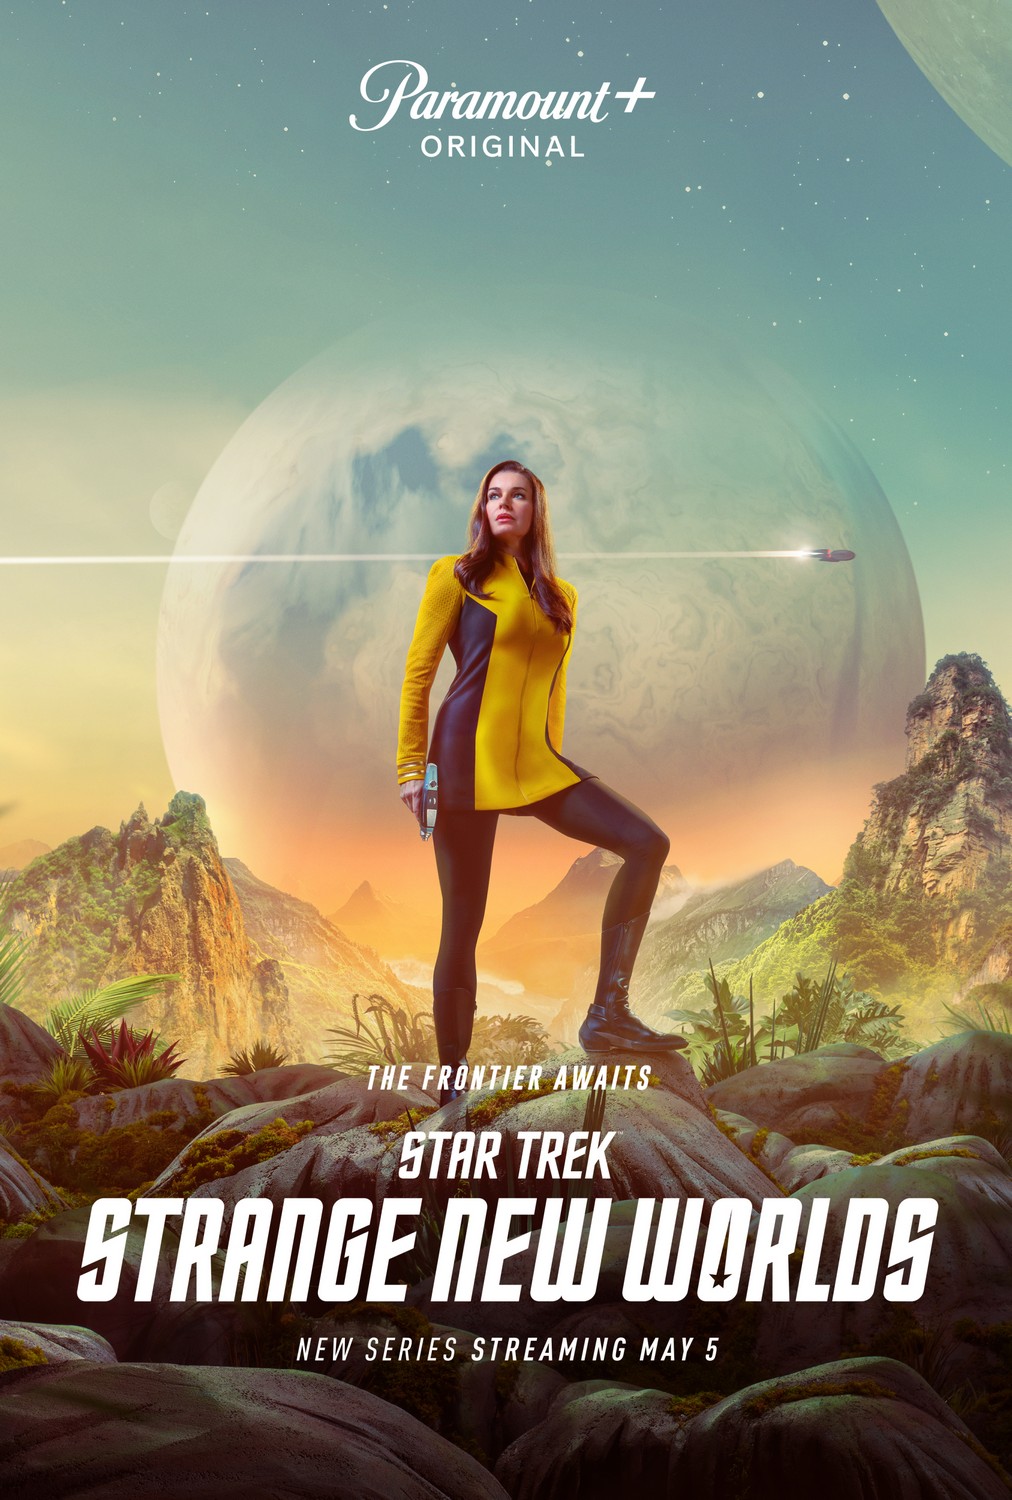 Check Out New ‘Star Trek Strange New Worlds’ Character Posters